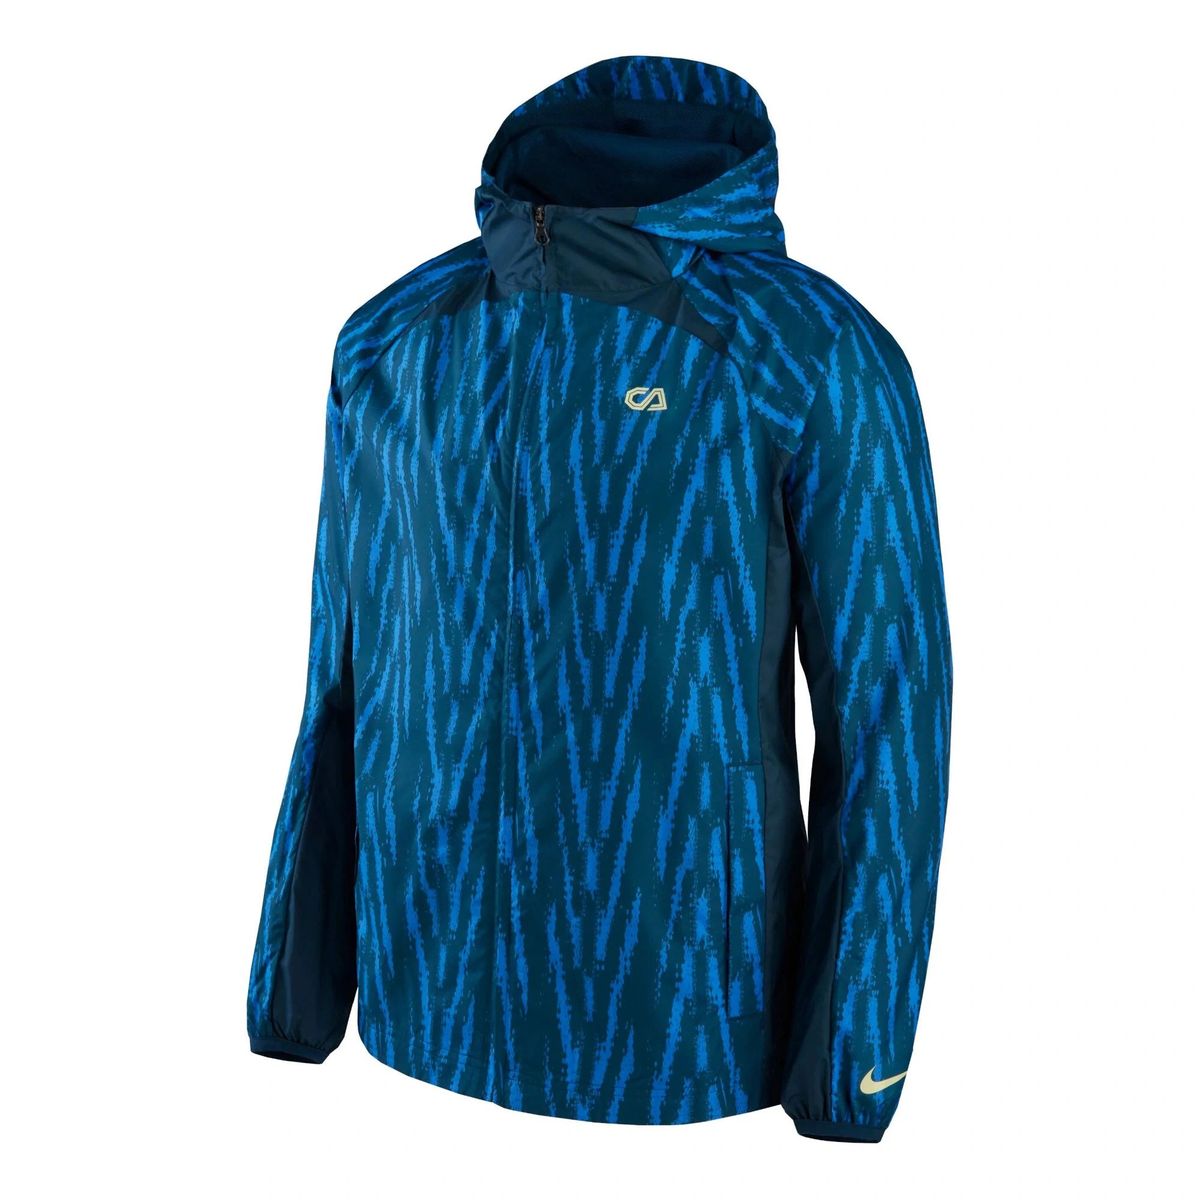 Nike Club America All Weather Jacket 23/24 (Blue Jay/Midnight Navy) -  Soccer Wearhouse